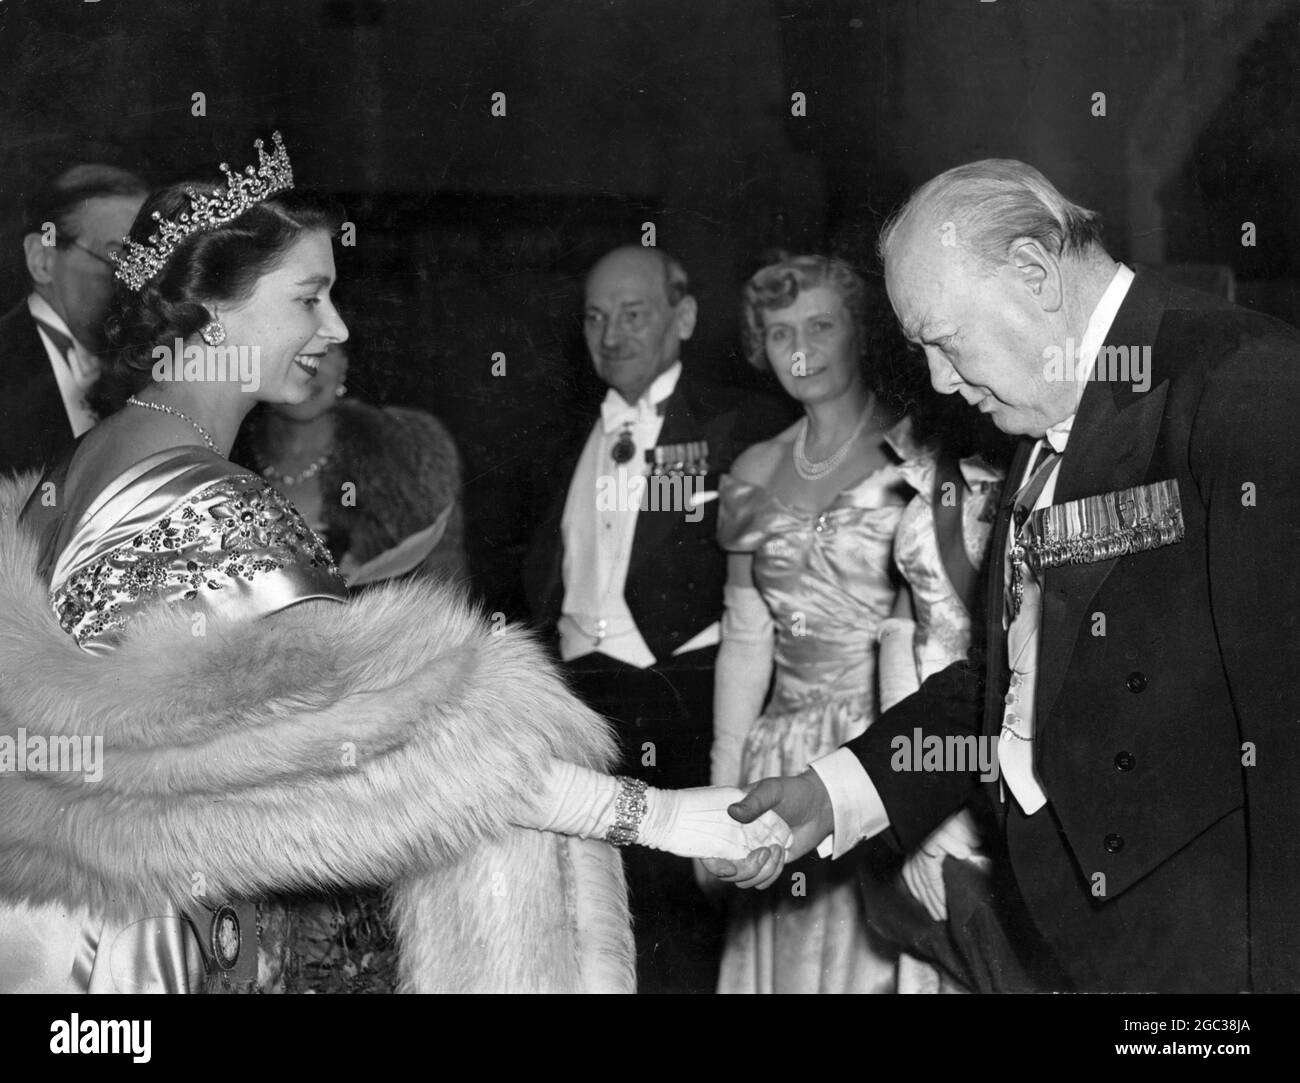 HRH Princess Elizabeth greets Mr Winston Churchill at the Guildhall dinner at which the Lord Mayor's National Thanksgiving Fund was launched. In the background can be seen the Prime Minister Mr Atlee and Mrs Atlee 23rd March 1950 Stock Photo